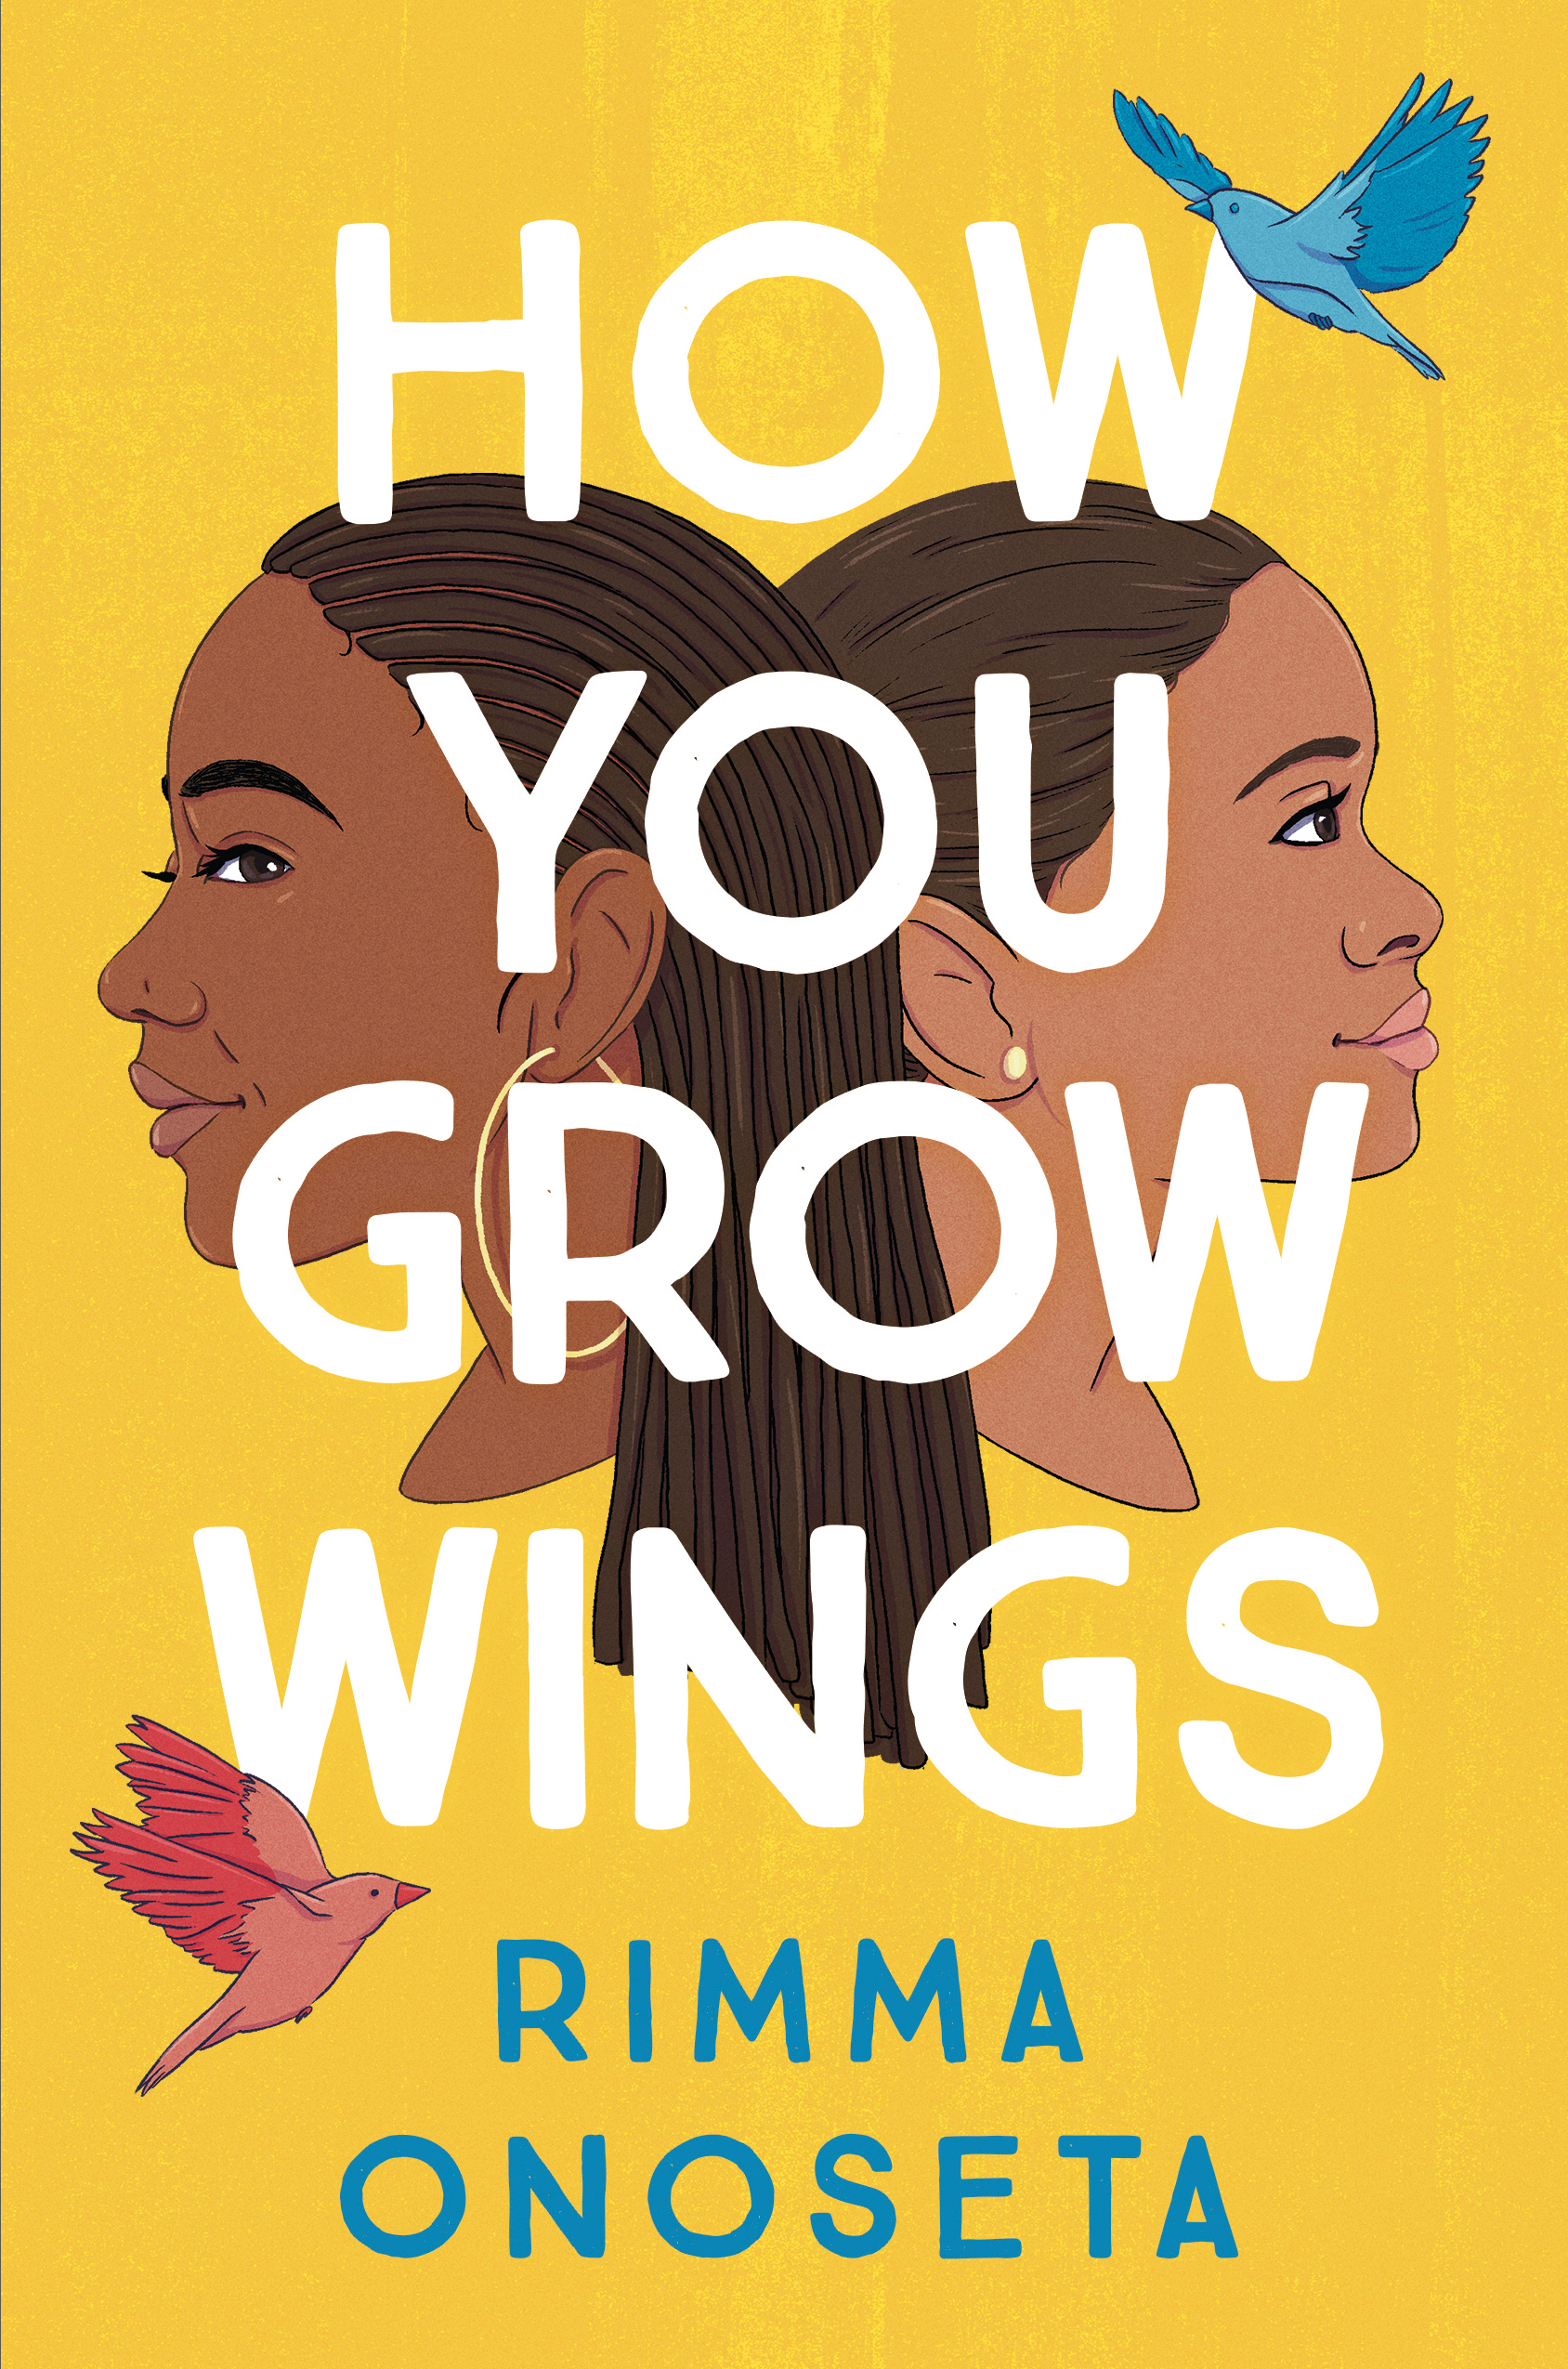 Spotlight on How You Grow Wings (Rimma Onoseta), Excerpt & Giveaway! ~ US Only